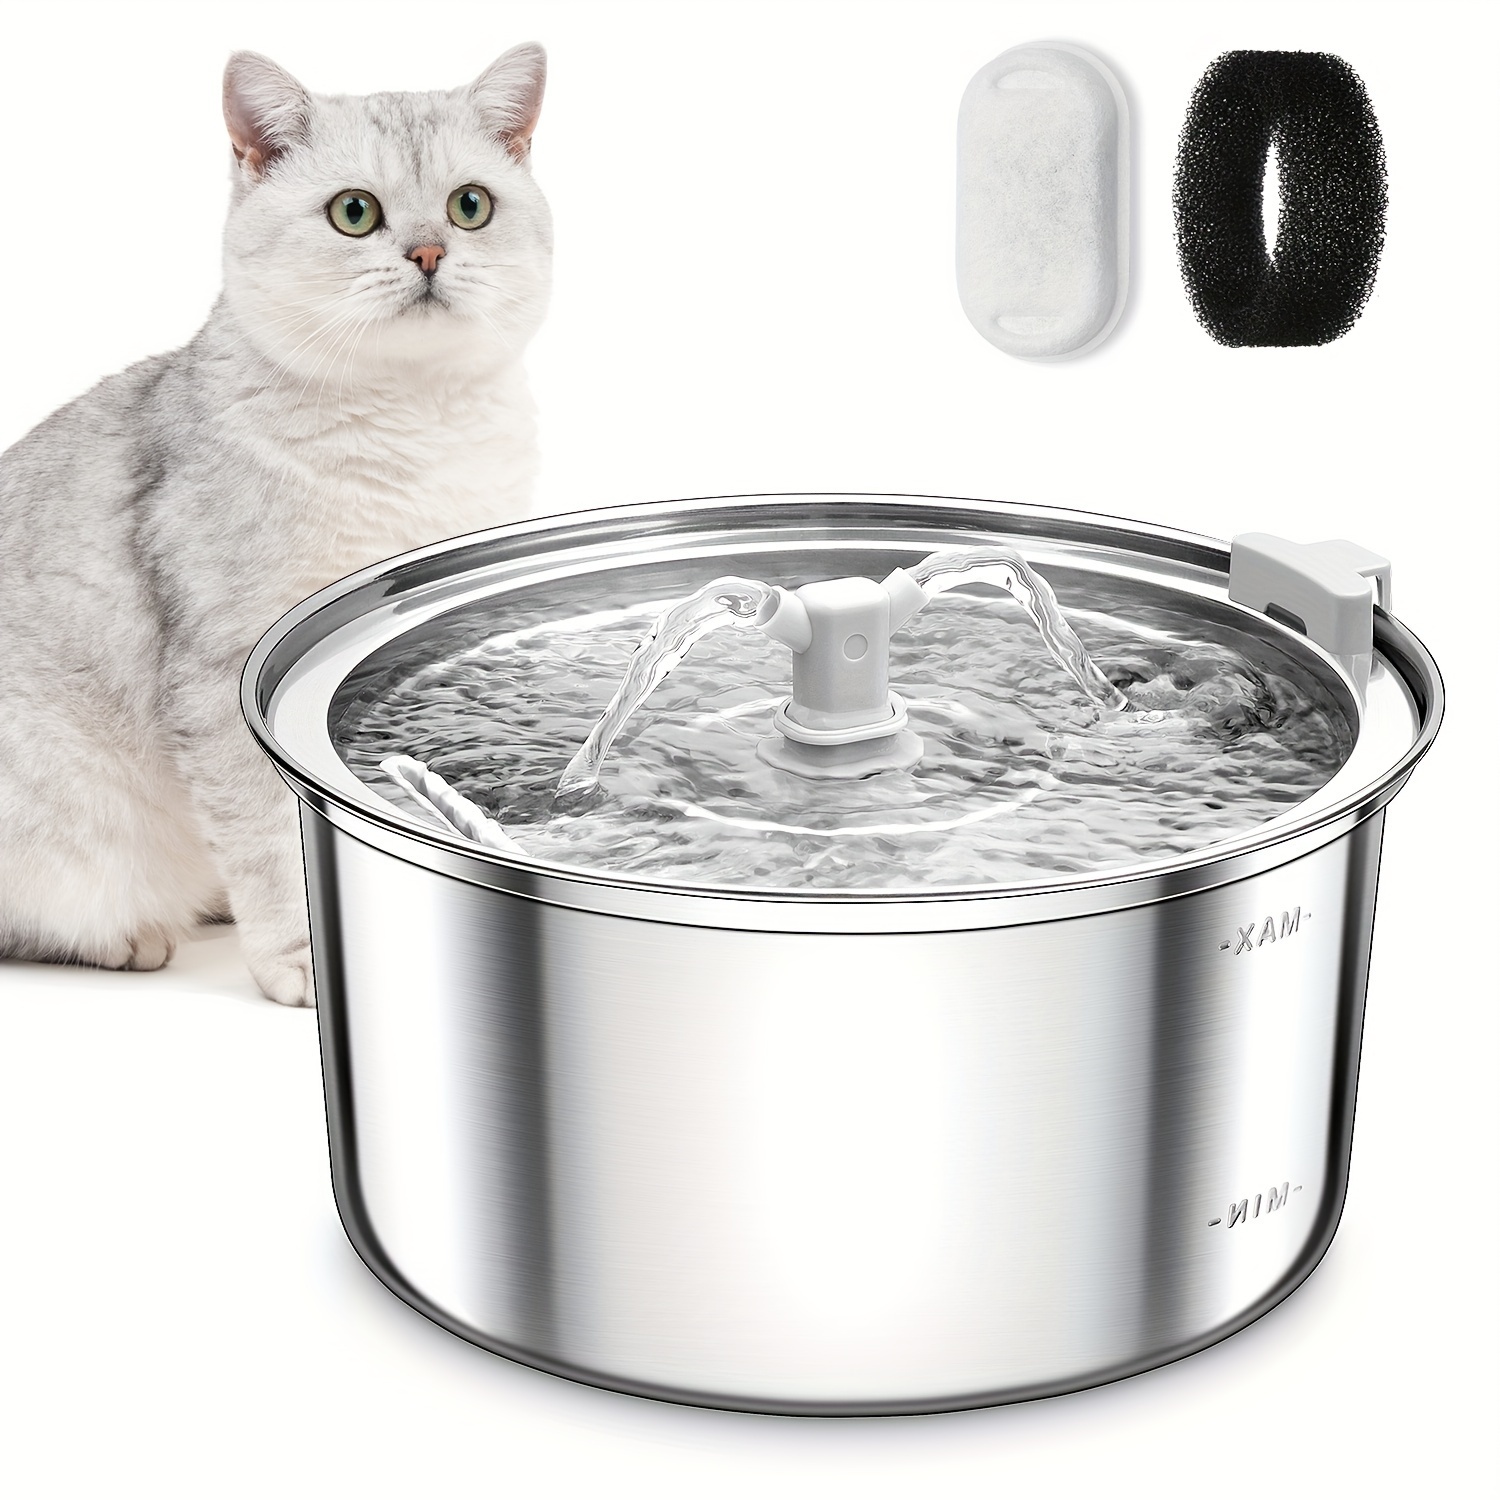 

Cat Water Fountain Stainless Steel, 3.2l/108oz Pet Water Fountain For Cats Inside With 2 Faucets, Ultra-quiet Pump Pet Water Dispenser For Cats, Dogs, Multiple Pets, Dishwasher Safe